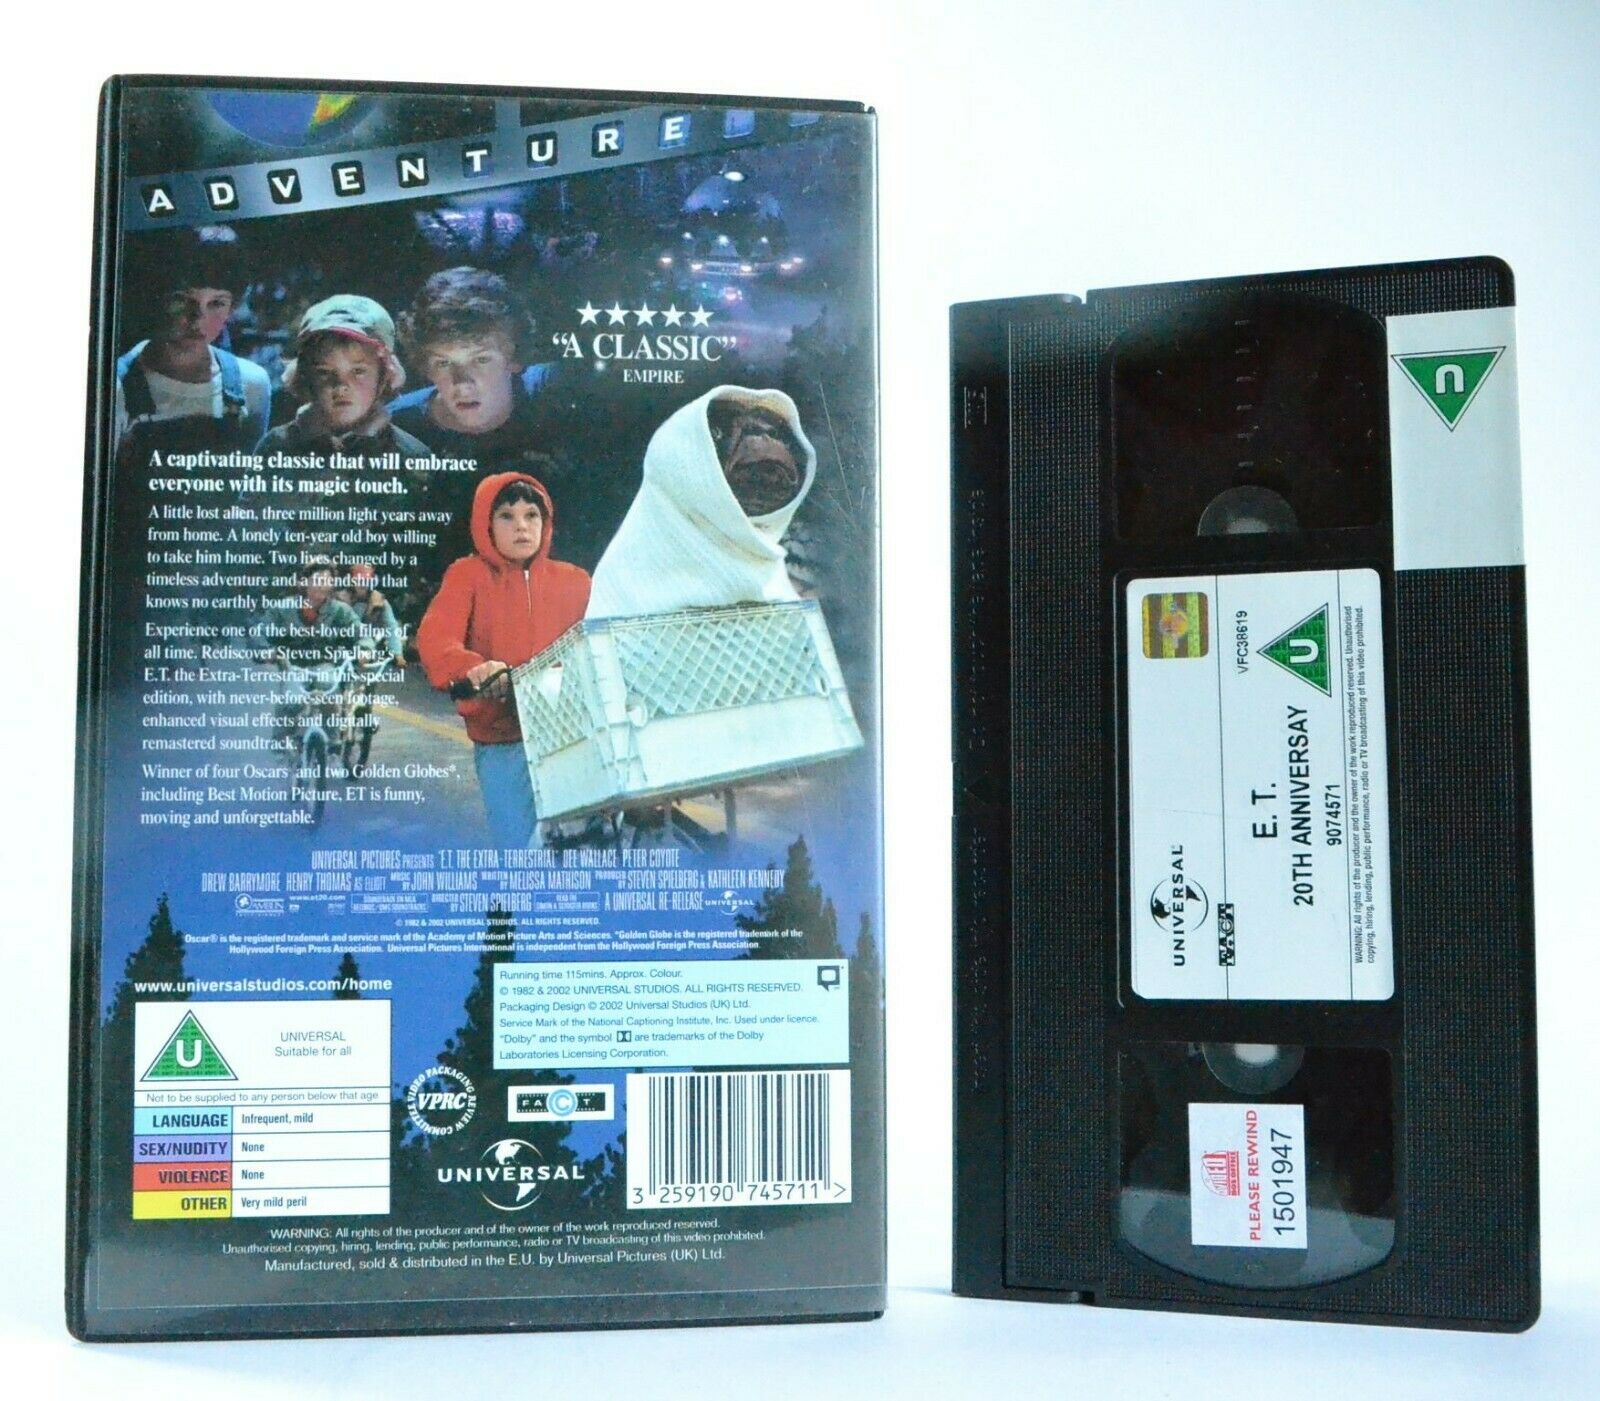 E.T.:The Extra-Terrestial - Adventure (1982) - 20th Anniversary Edition - VHS-